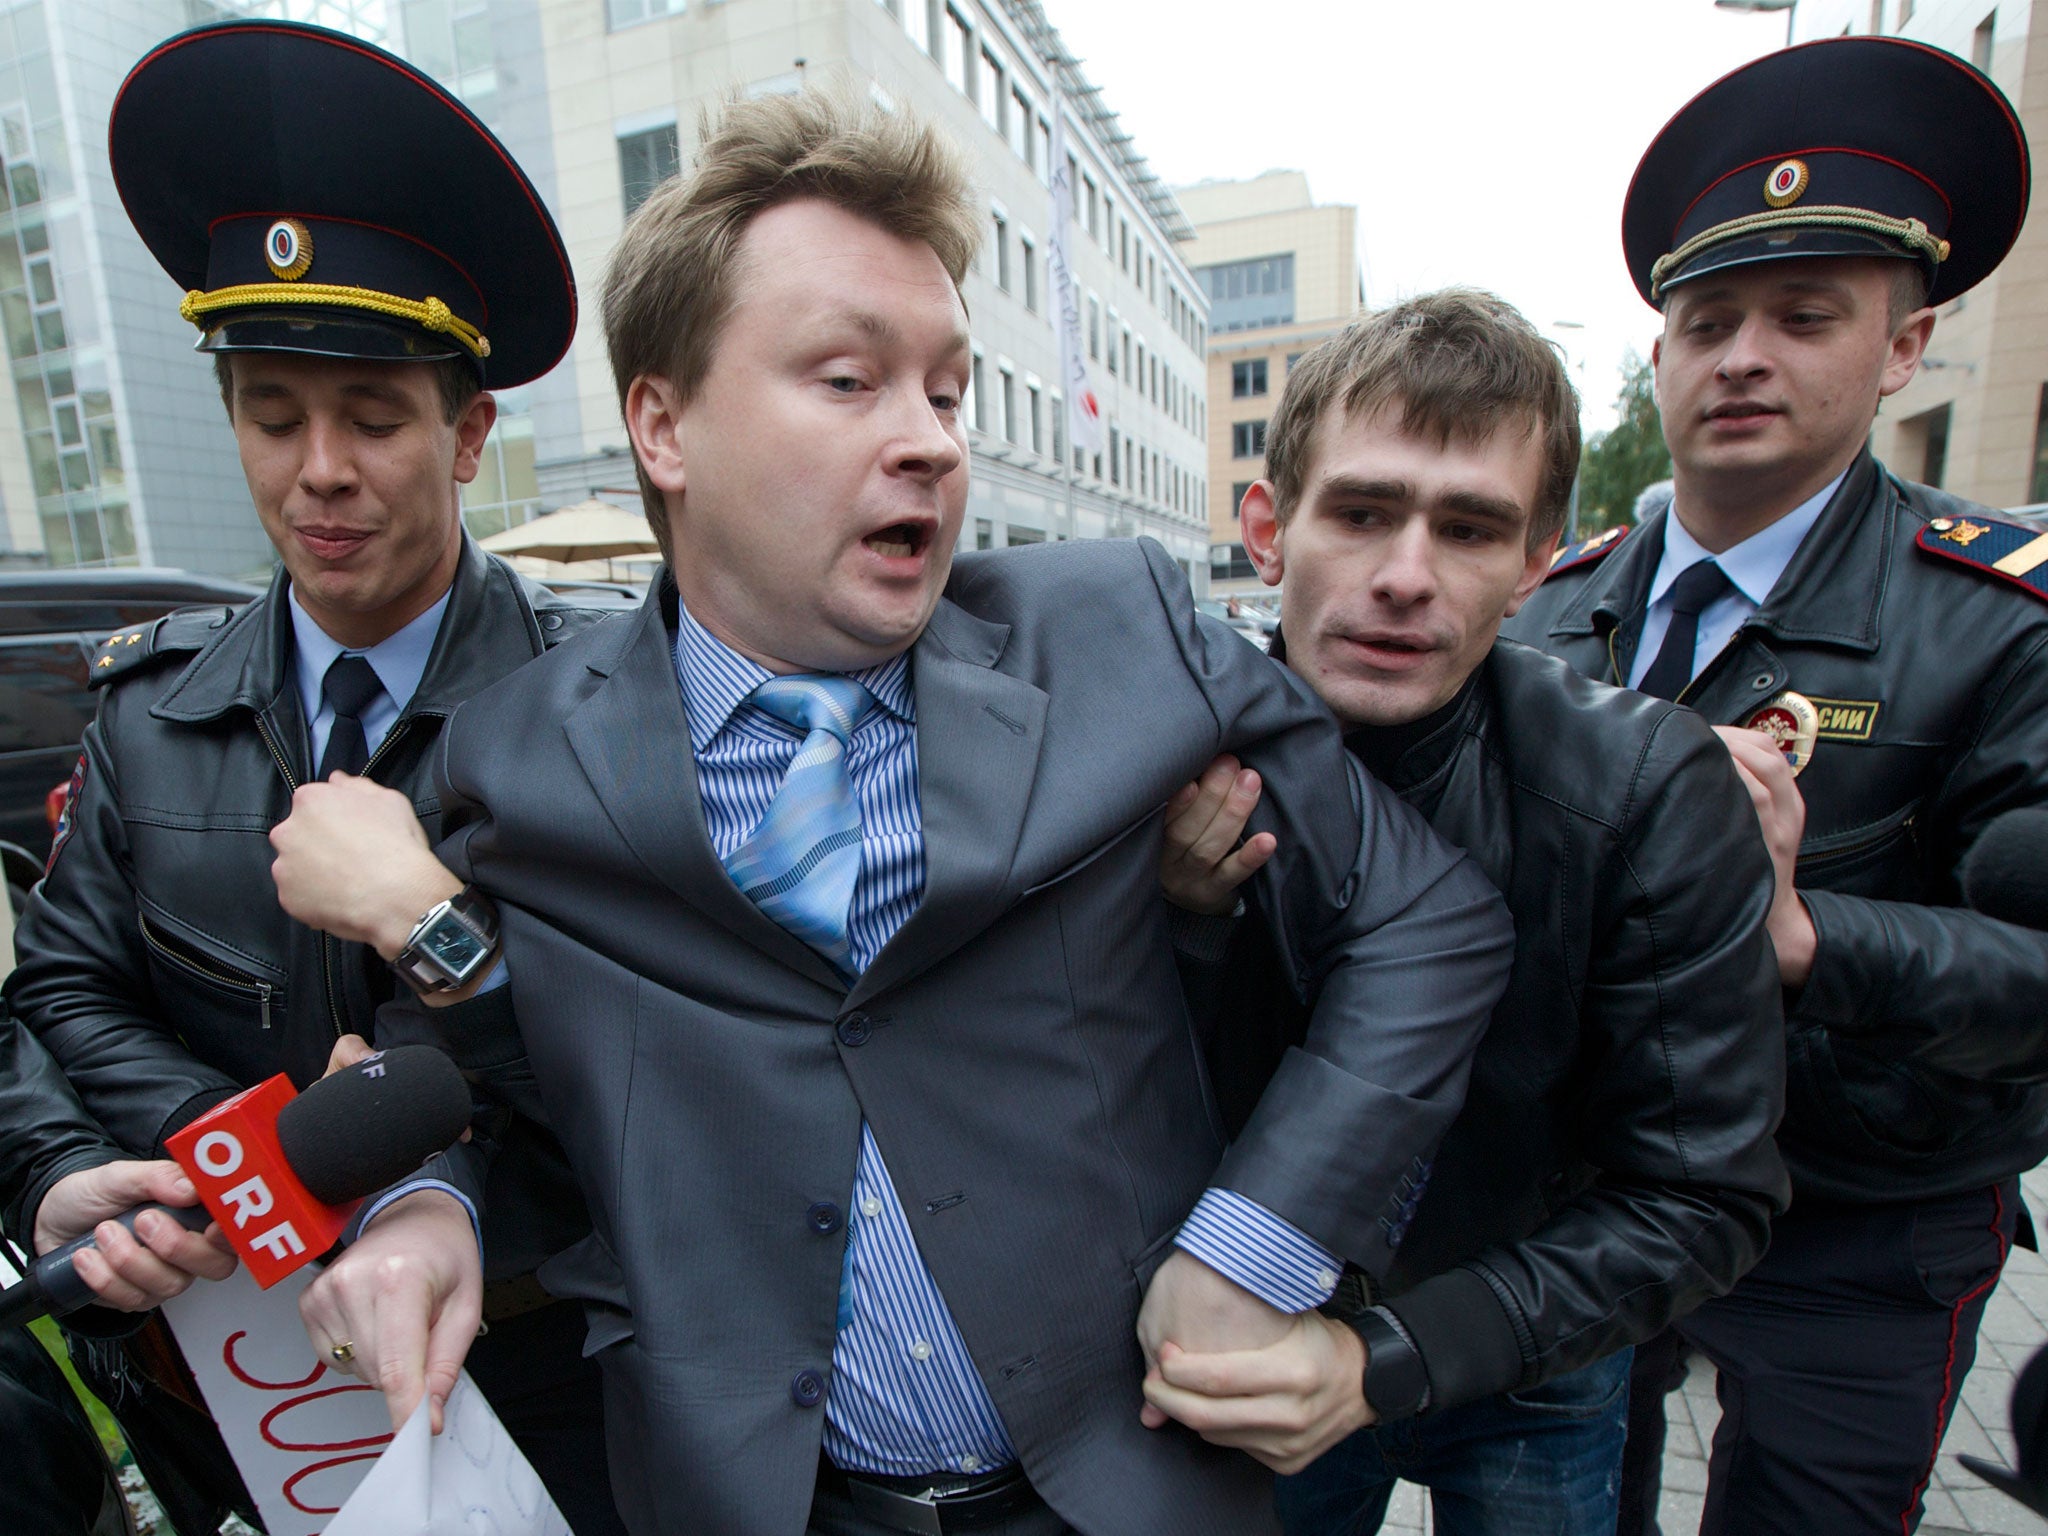 Police detain Nikolai Alexeyev during a protest outside the Sochi 2014 Winter Olympic Games